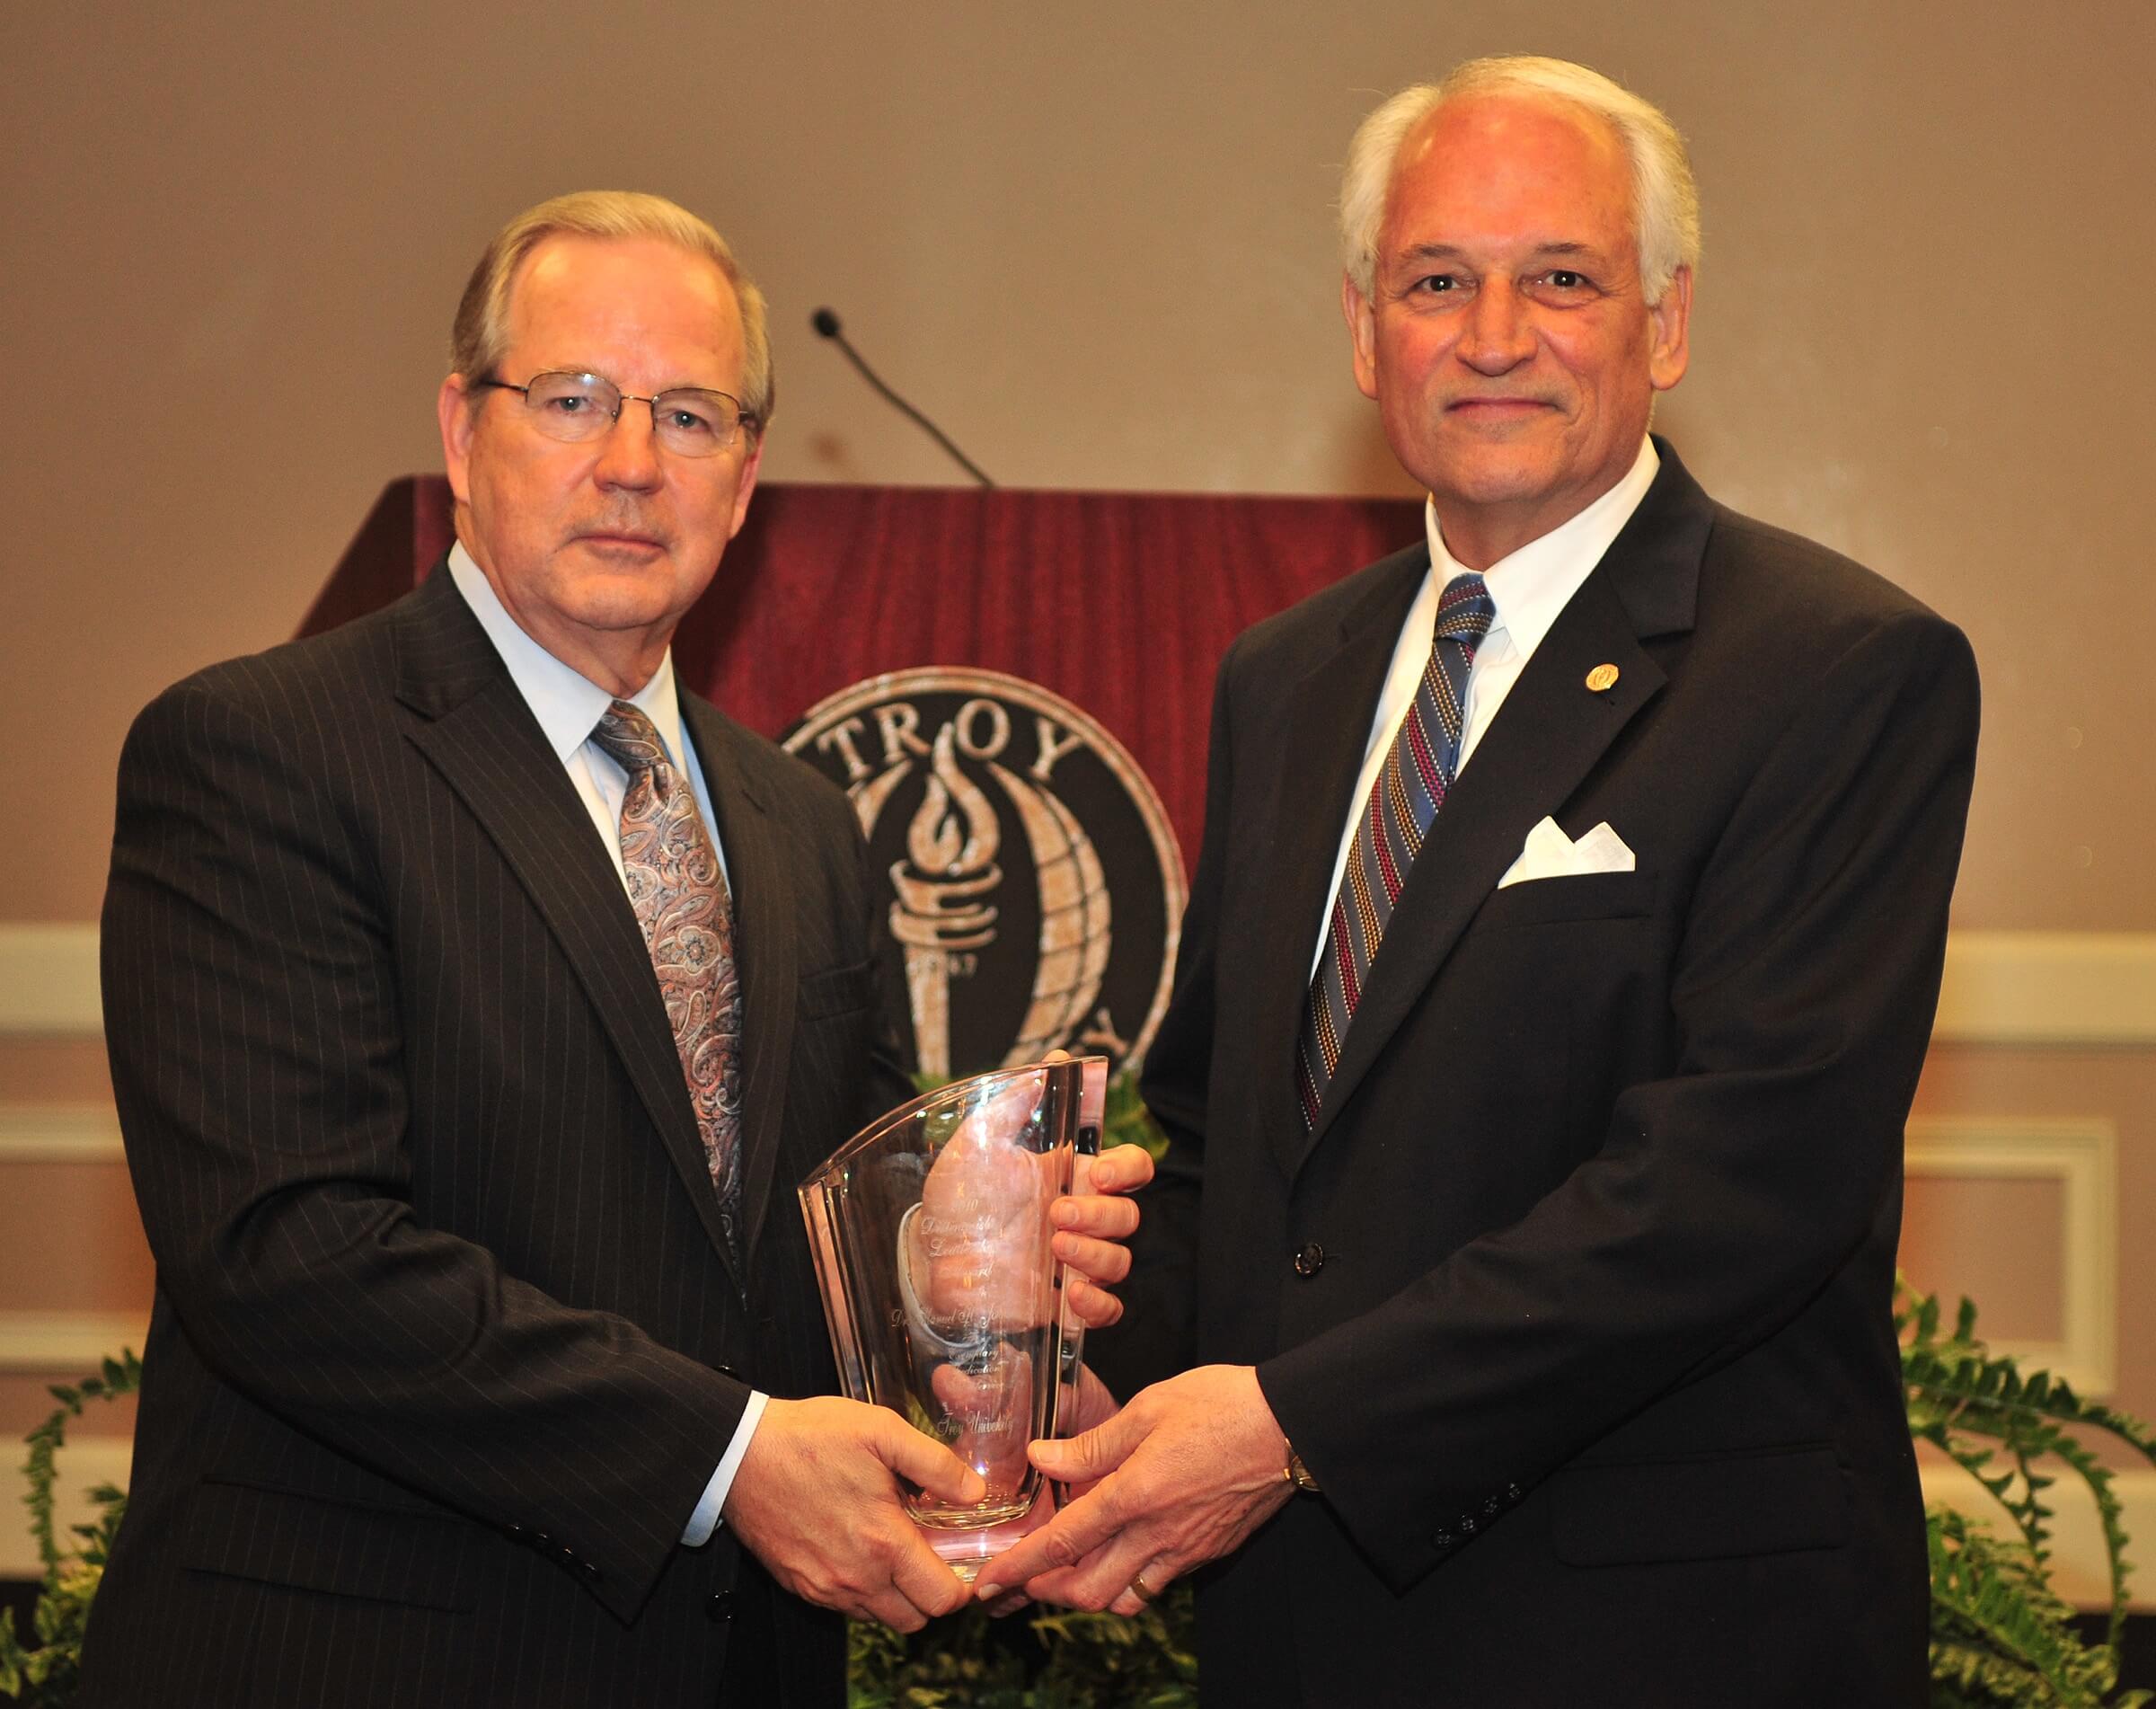 Chancellor Hawkins presents the 2010 Distinguished Leadership Award to Dr. Manley Johnson.